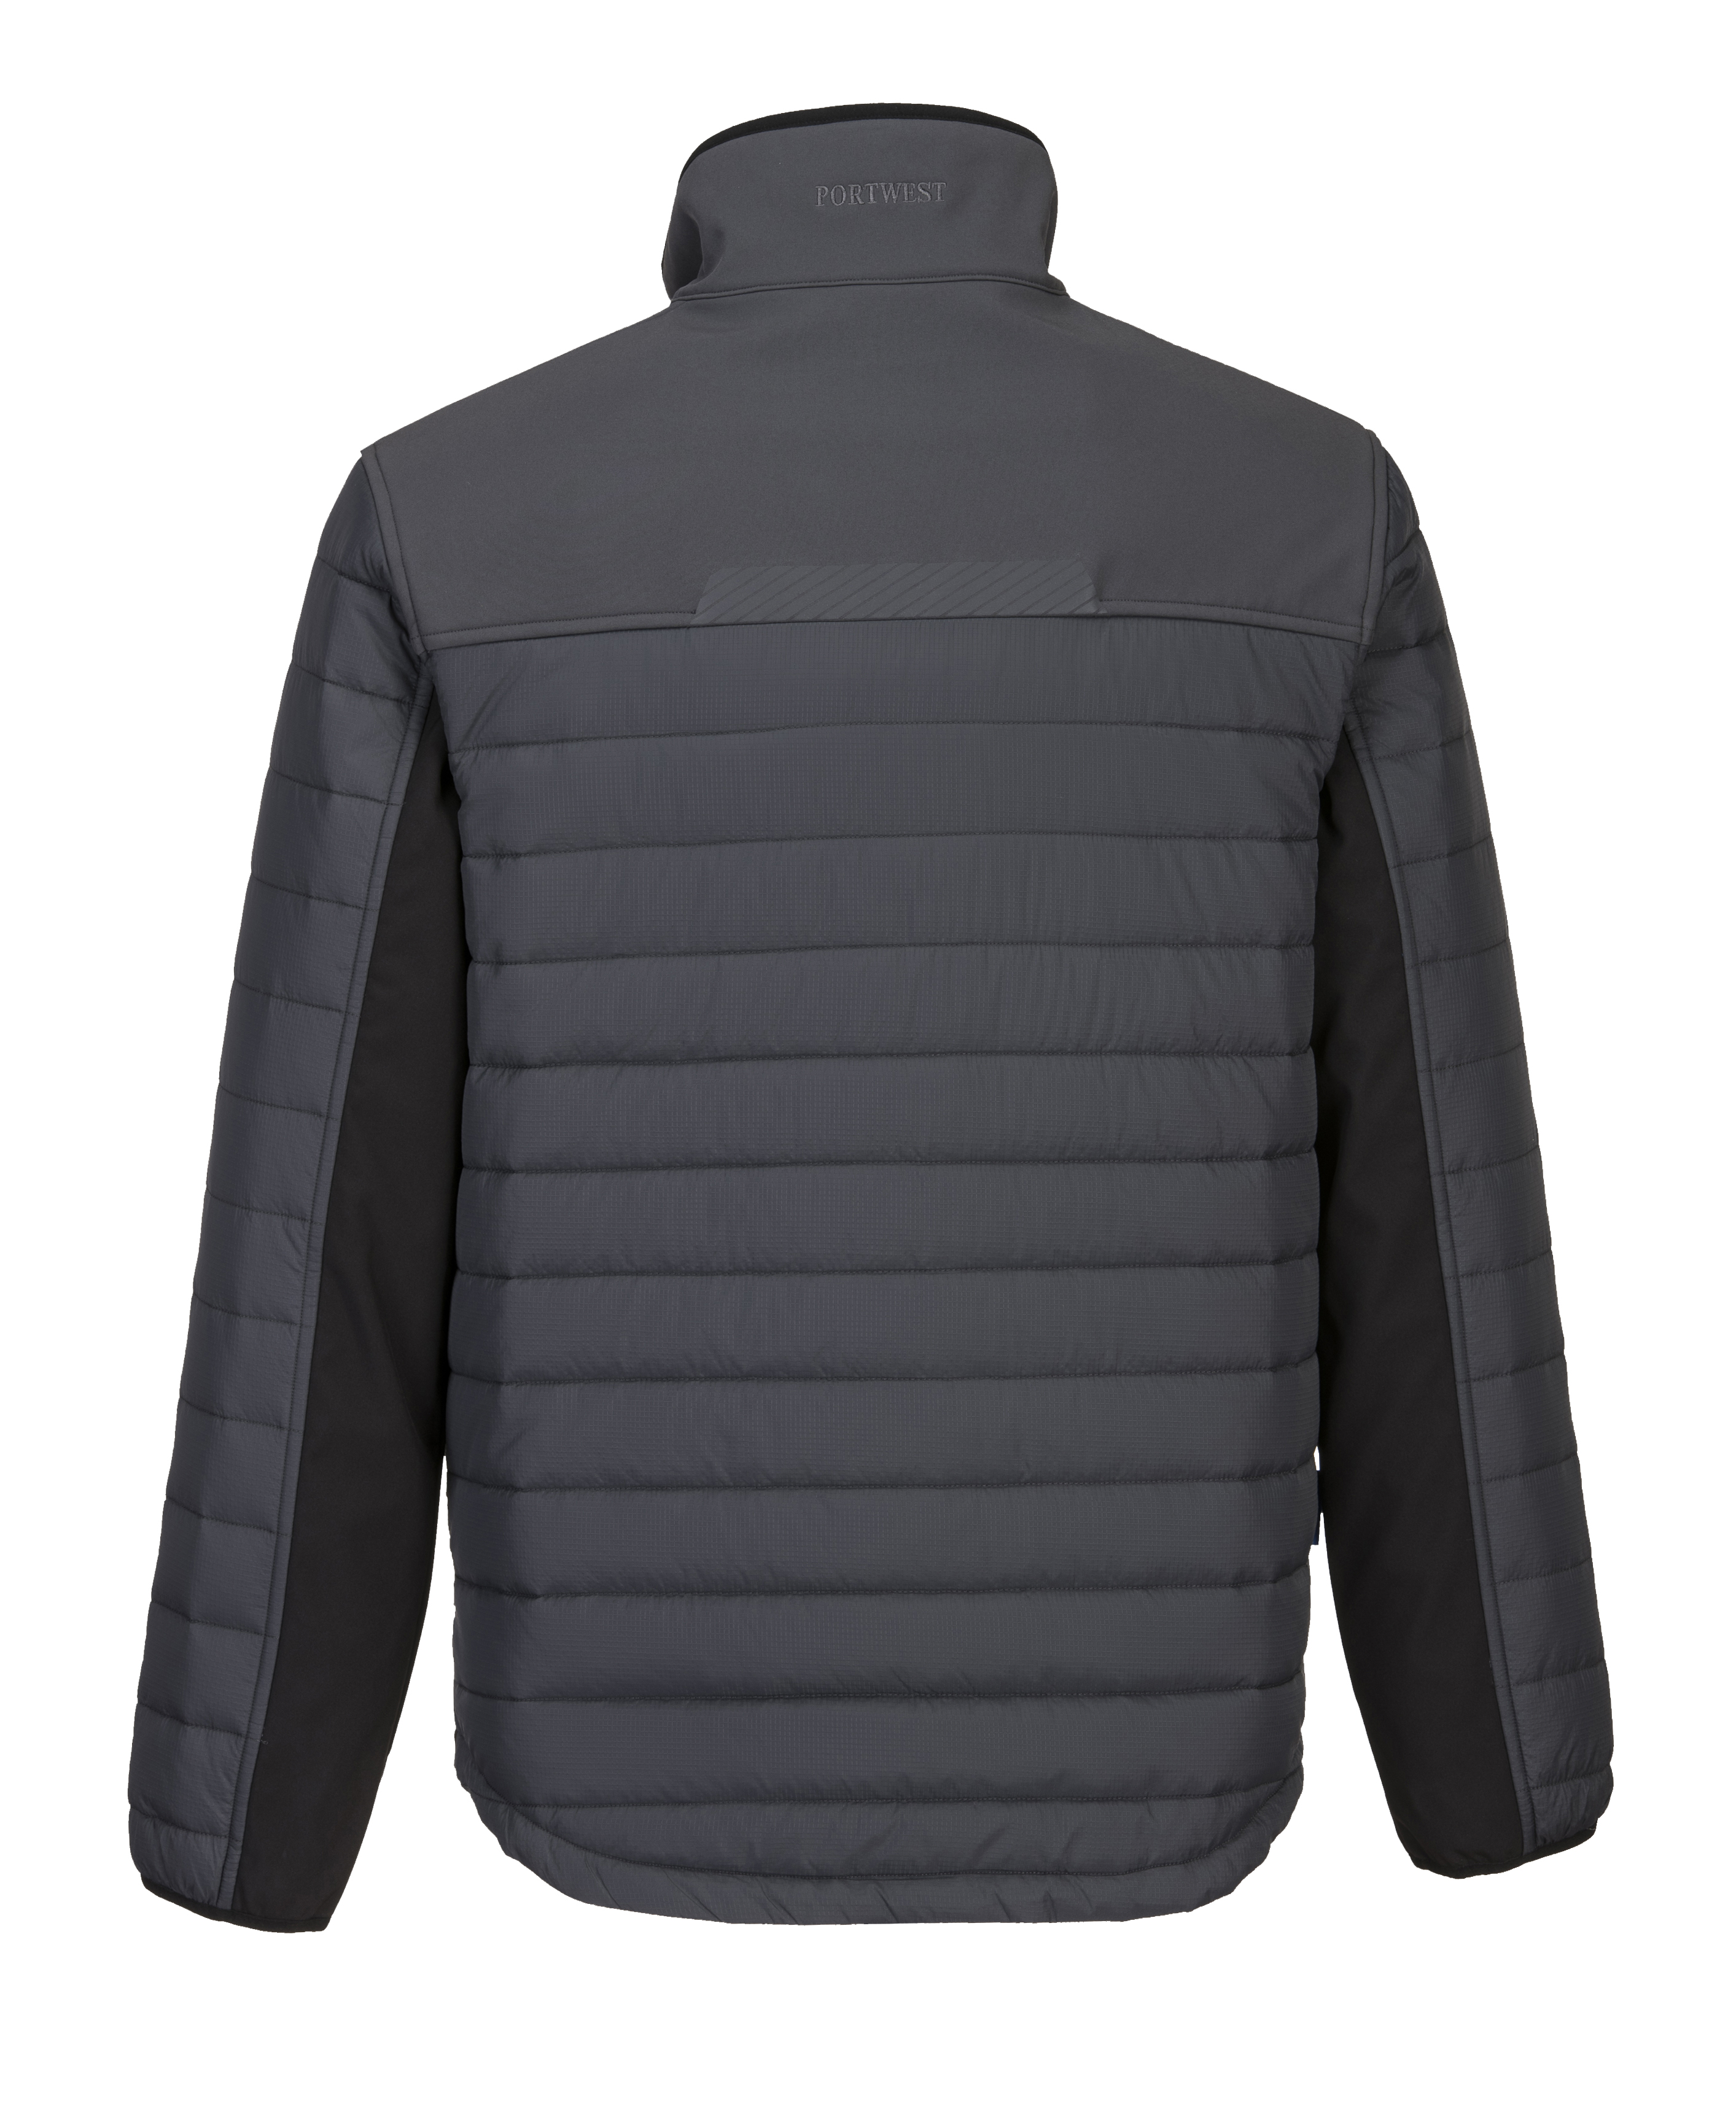 Made of durable breathable, windproof and water resistant fabric